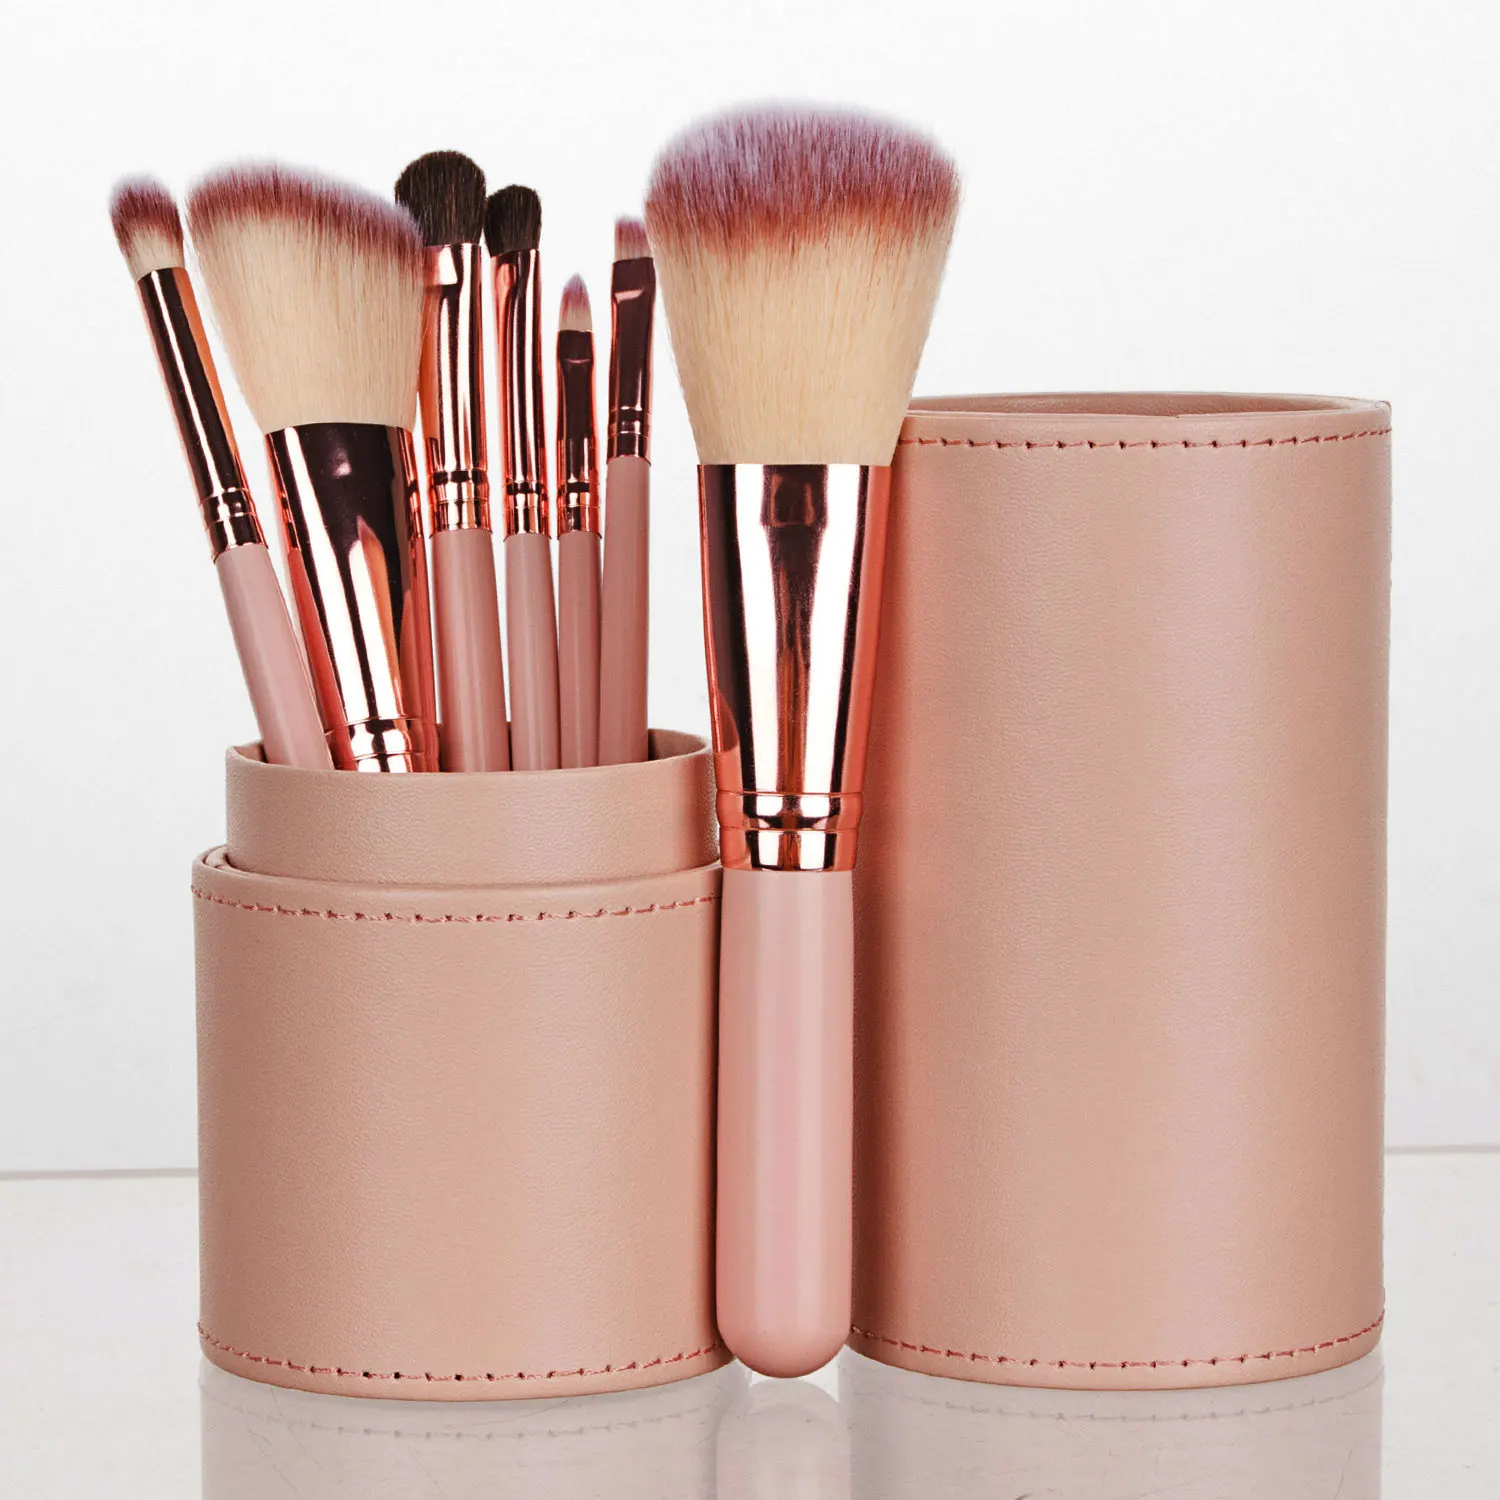 

1-7-20 7 pcs 7pcs high quality private label makeup brush set with cylinder case, Multipal colours